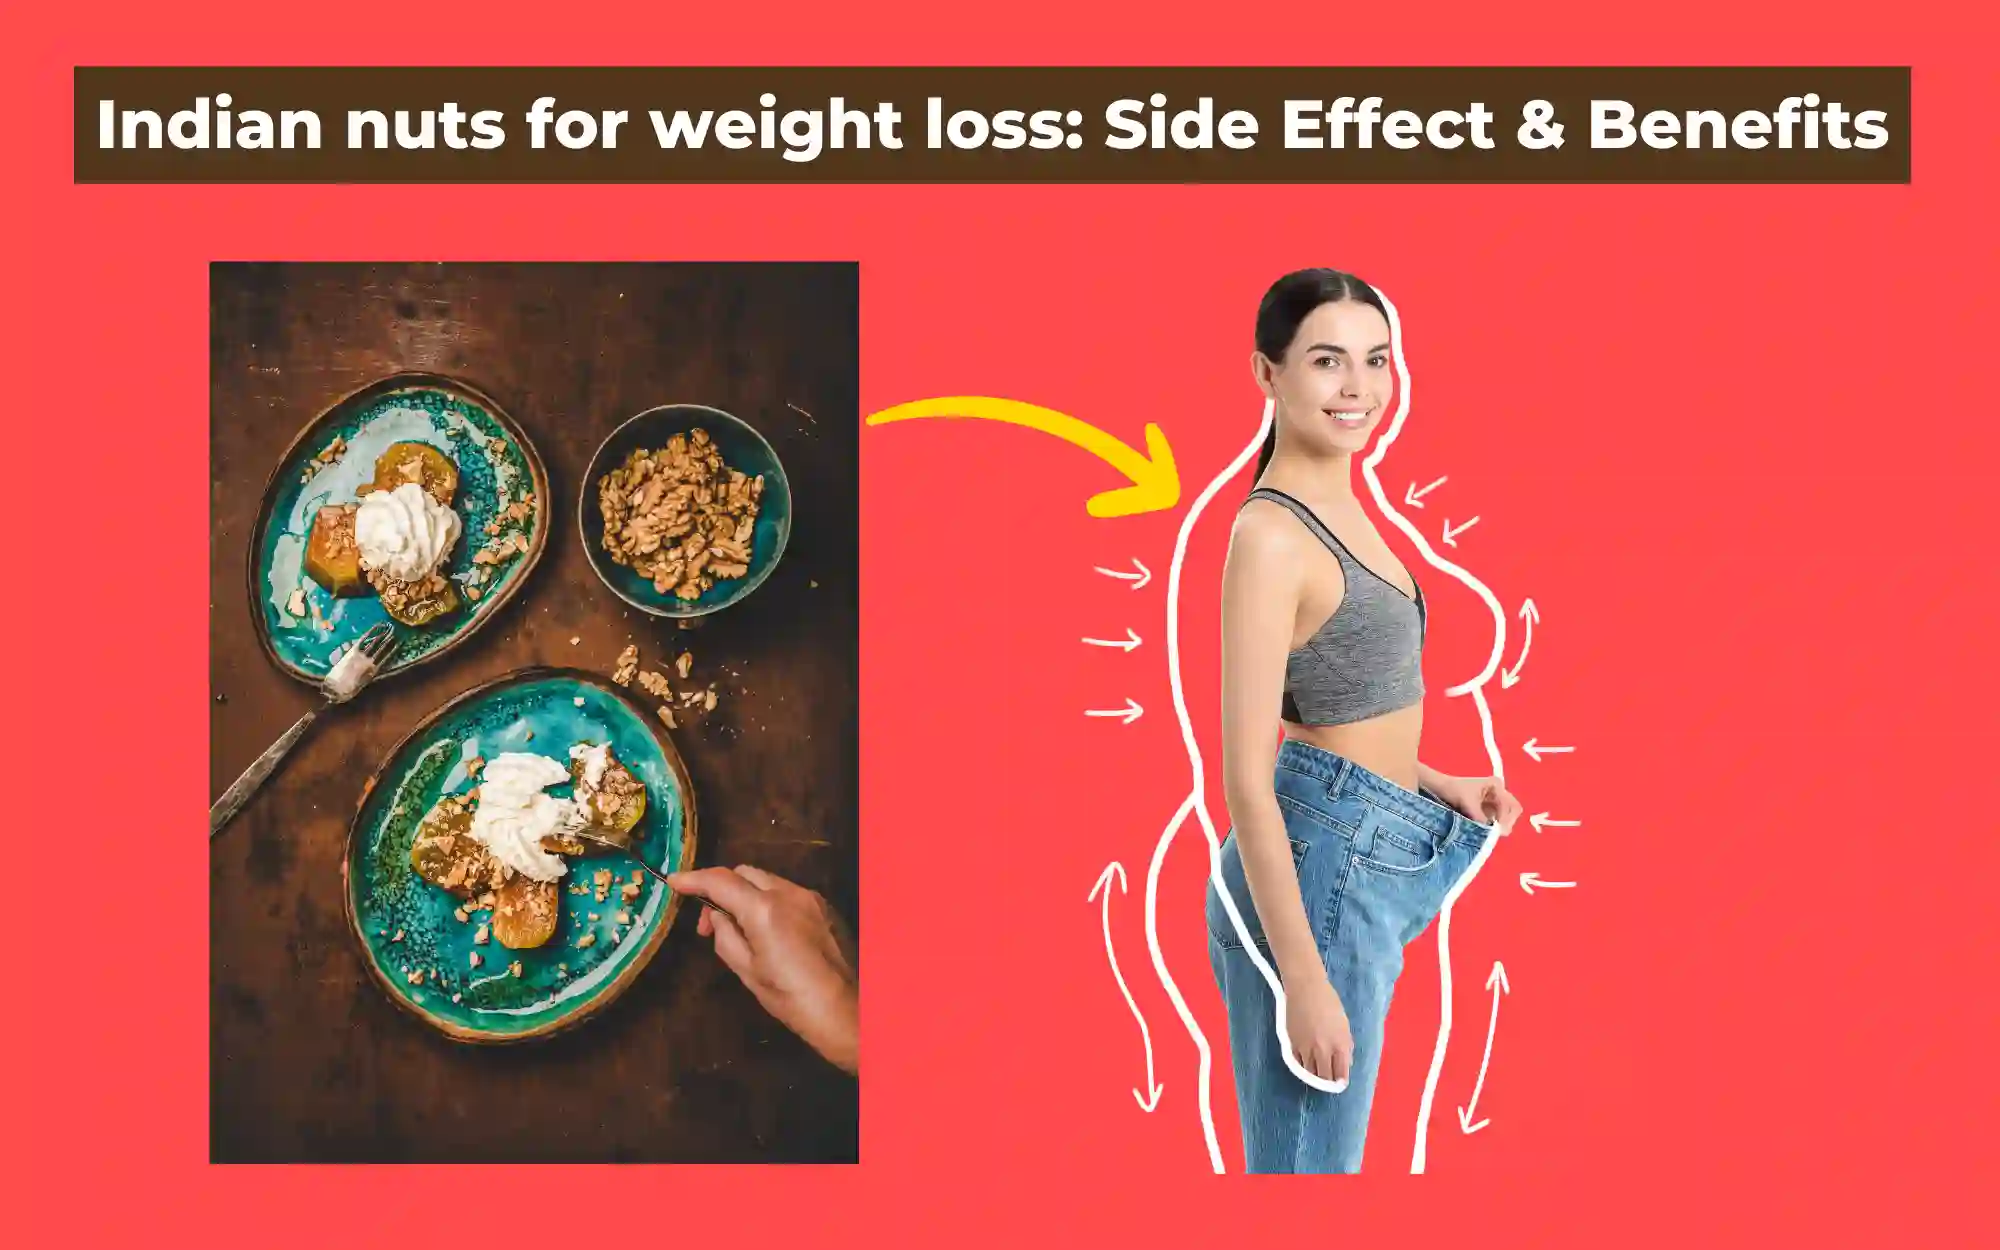 Indian nuts for weight loss